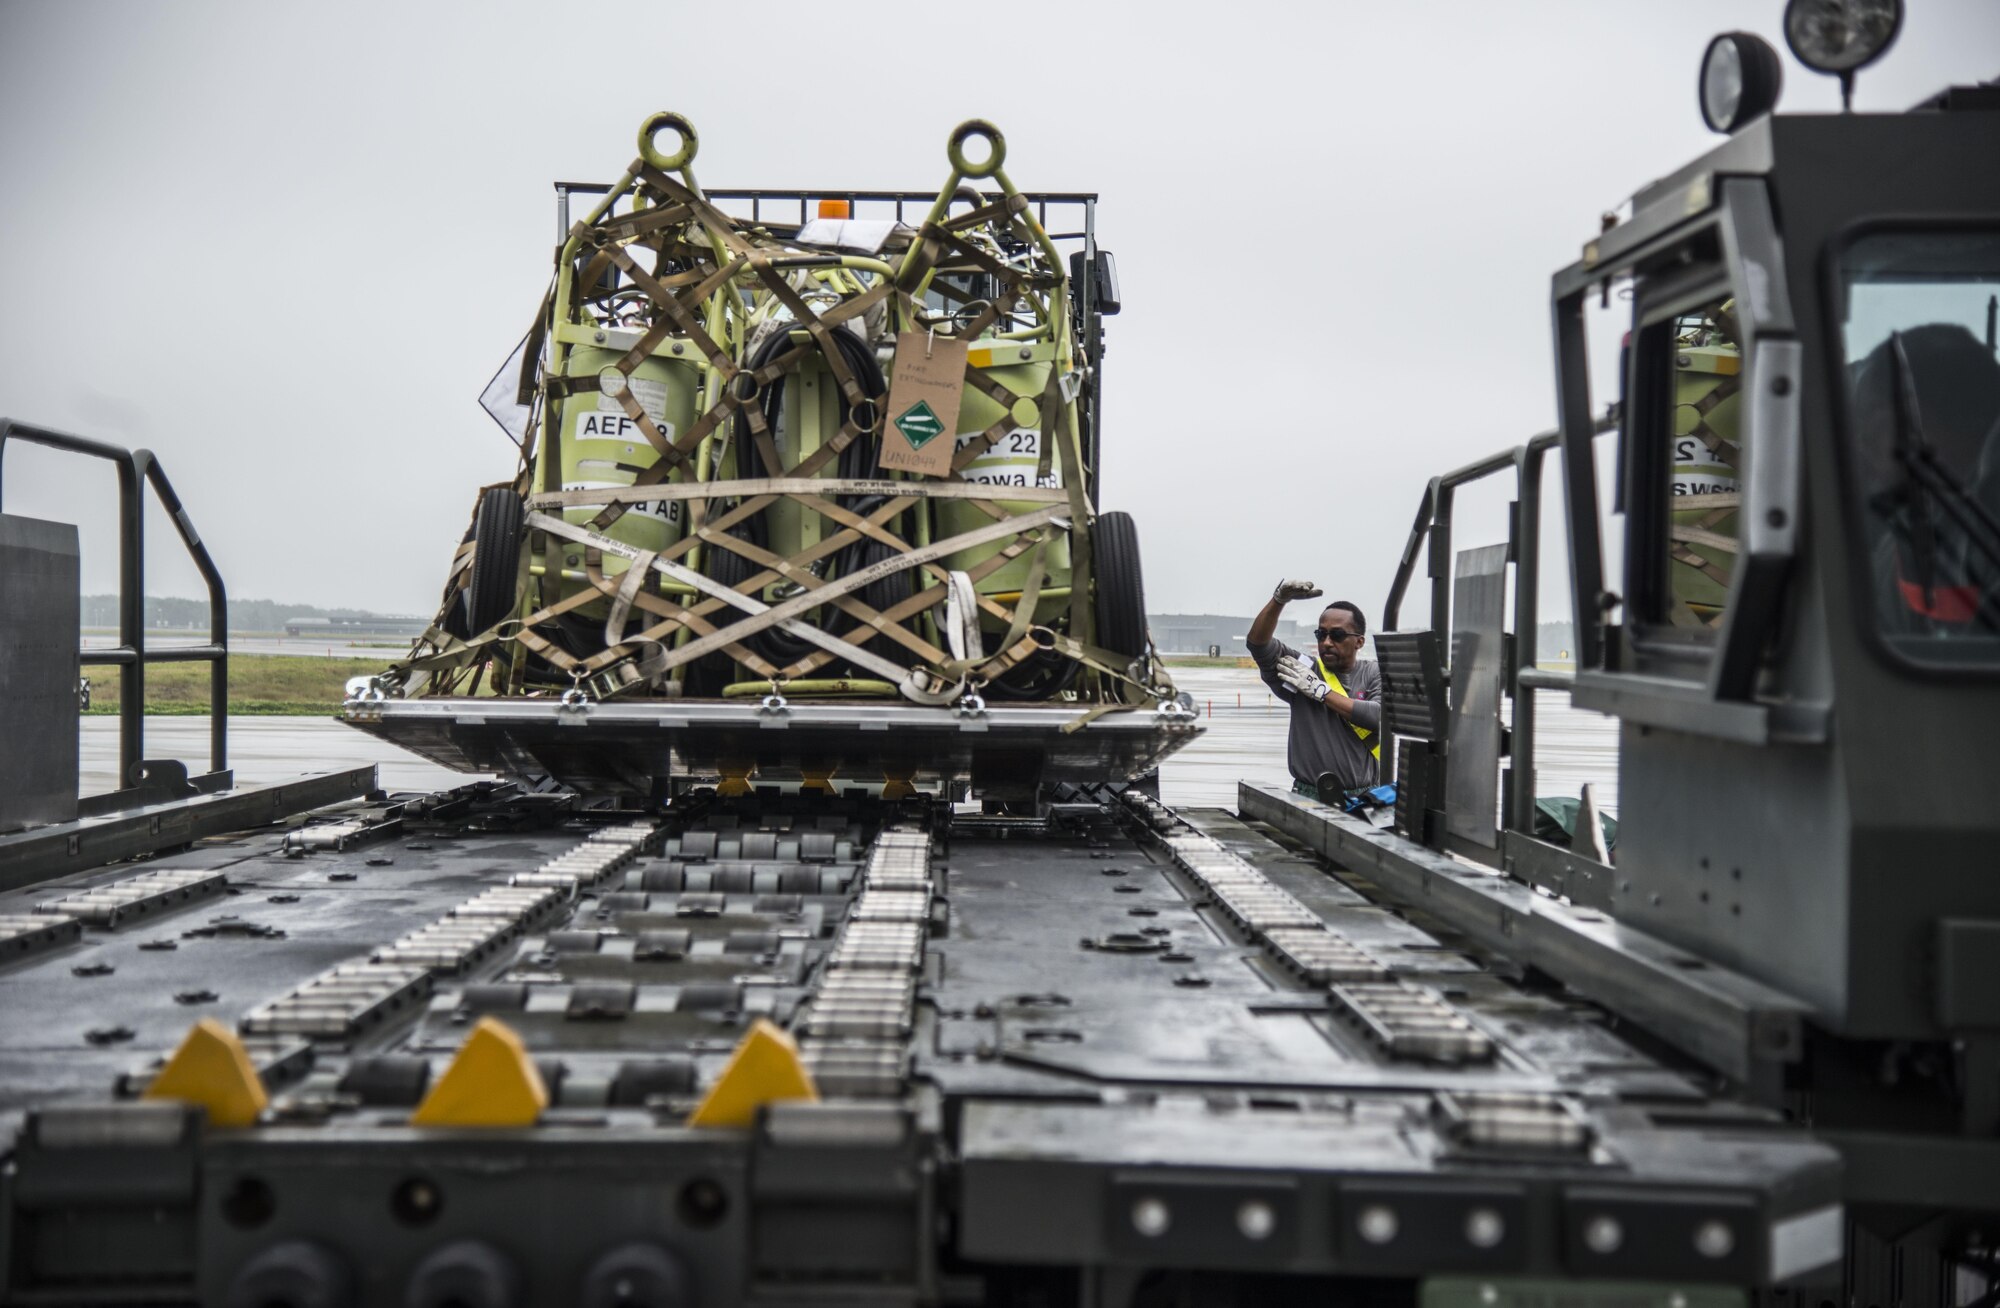 A loadcrew member directs an Airman operating a k-loader at Misawa Air Base, Japan, July 17, 2016. Airmen from the 35th Logistics Readiness Squadron loaded more than 461,000 pounds of cargo destined for Exercise Pitch Black in Australia. Exercise Pitch Black enhances the partnerships of the participing nations and places high value on regional security and fostering closer ties throughout the Indo-Asia-Pacific region. (U.S. Air Force photo by Senior Airman Brittany A. Chase)